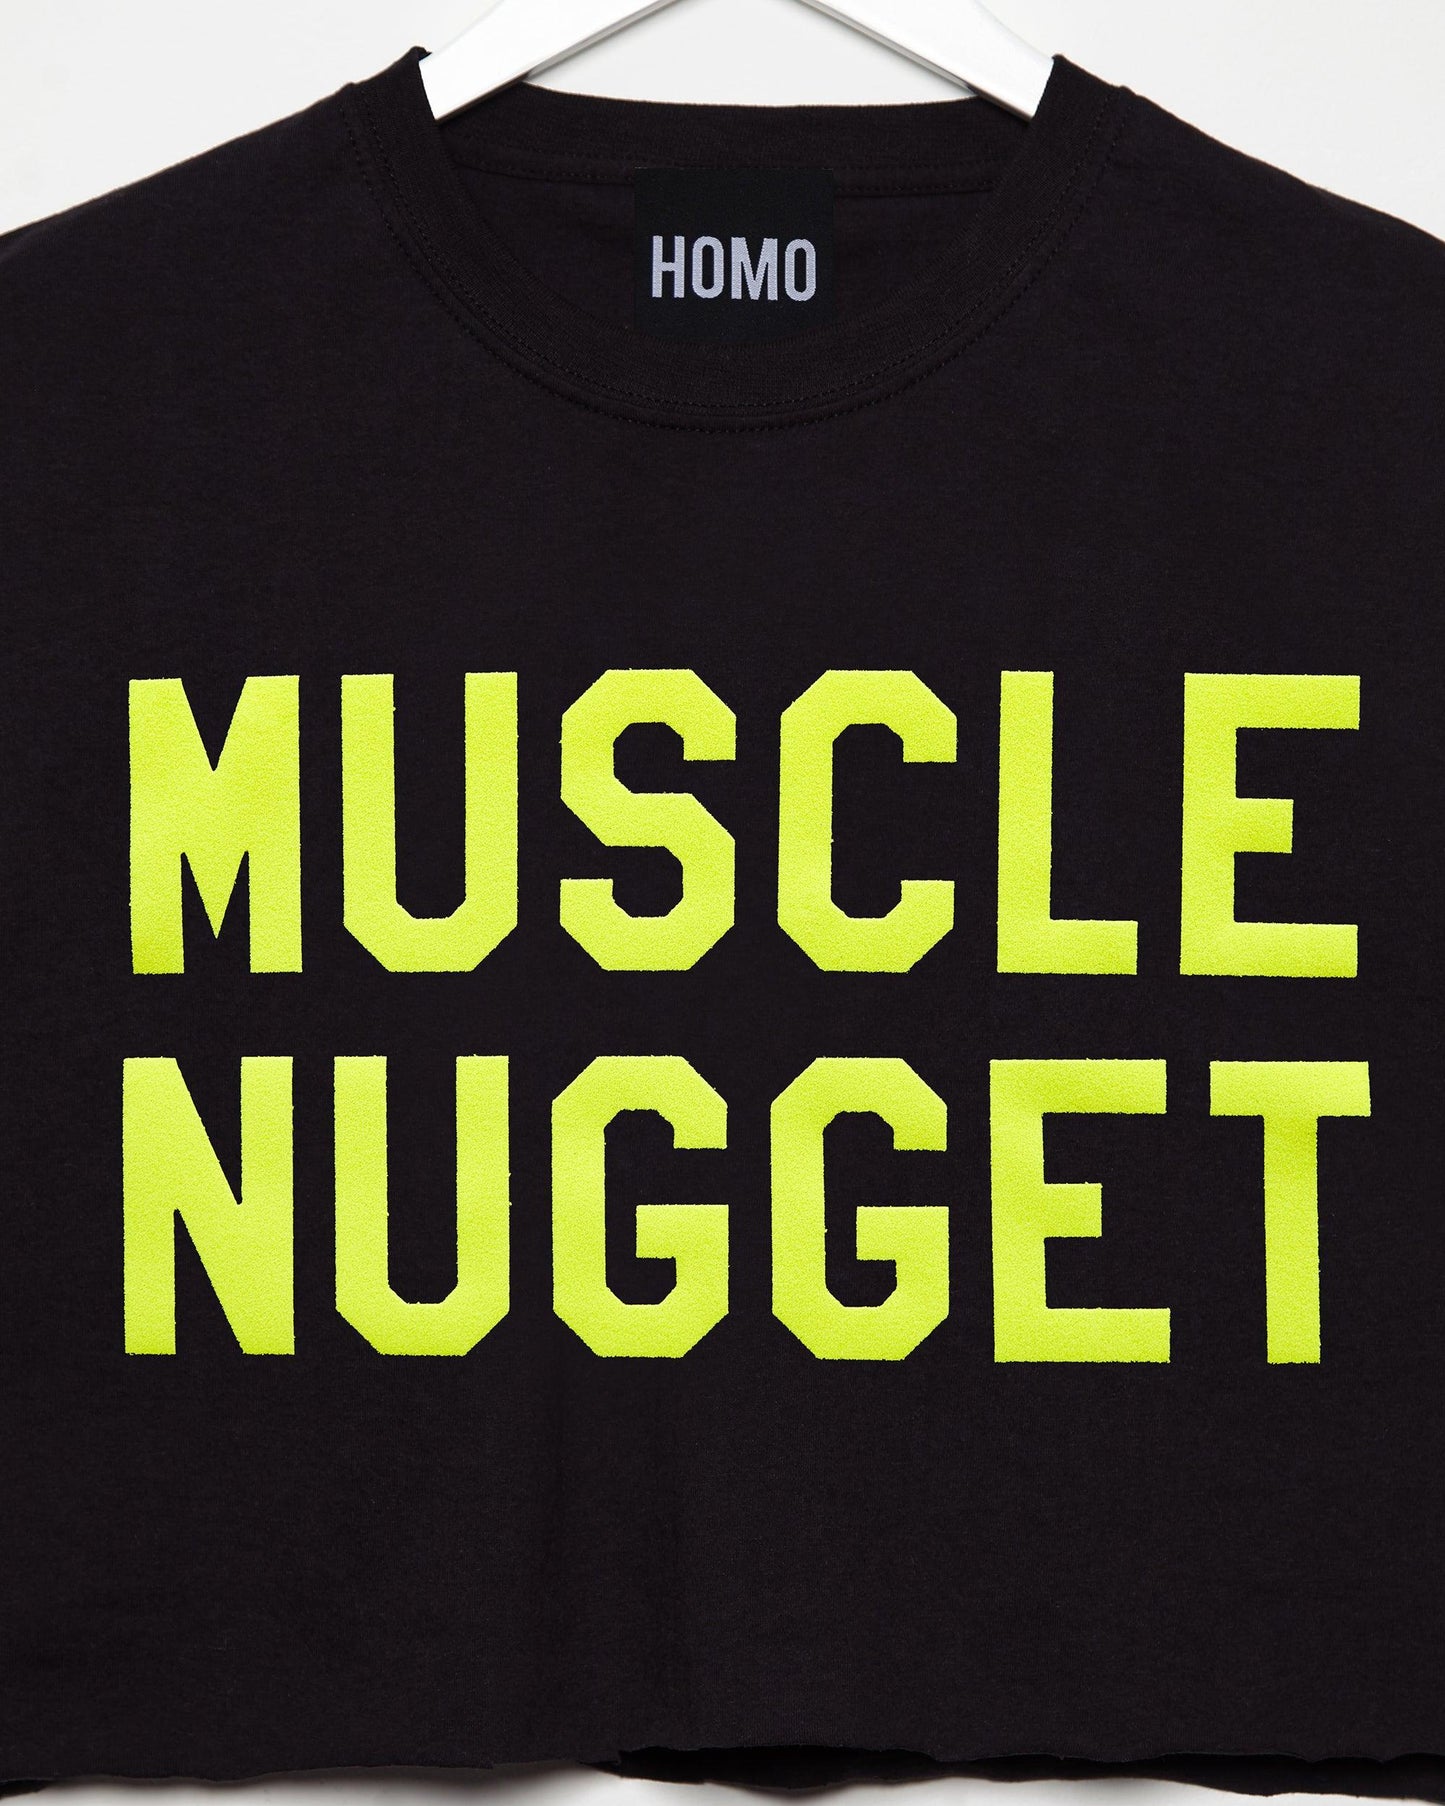 Fluorescent yellow flock muscle nugget - black cropped tee / crop top - HOMOLONDON